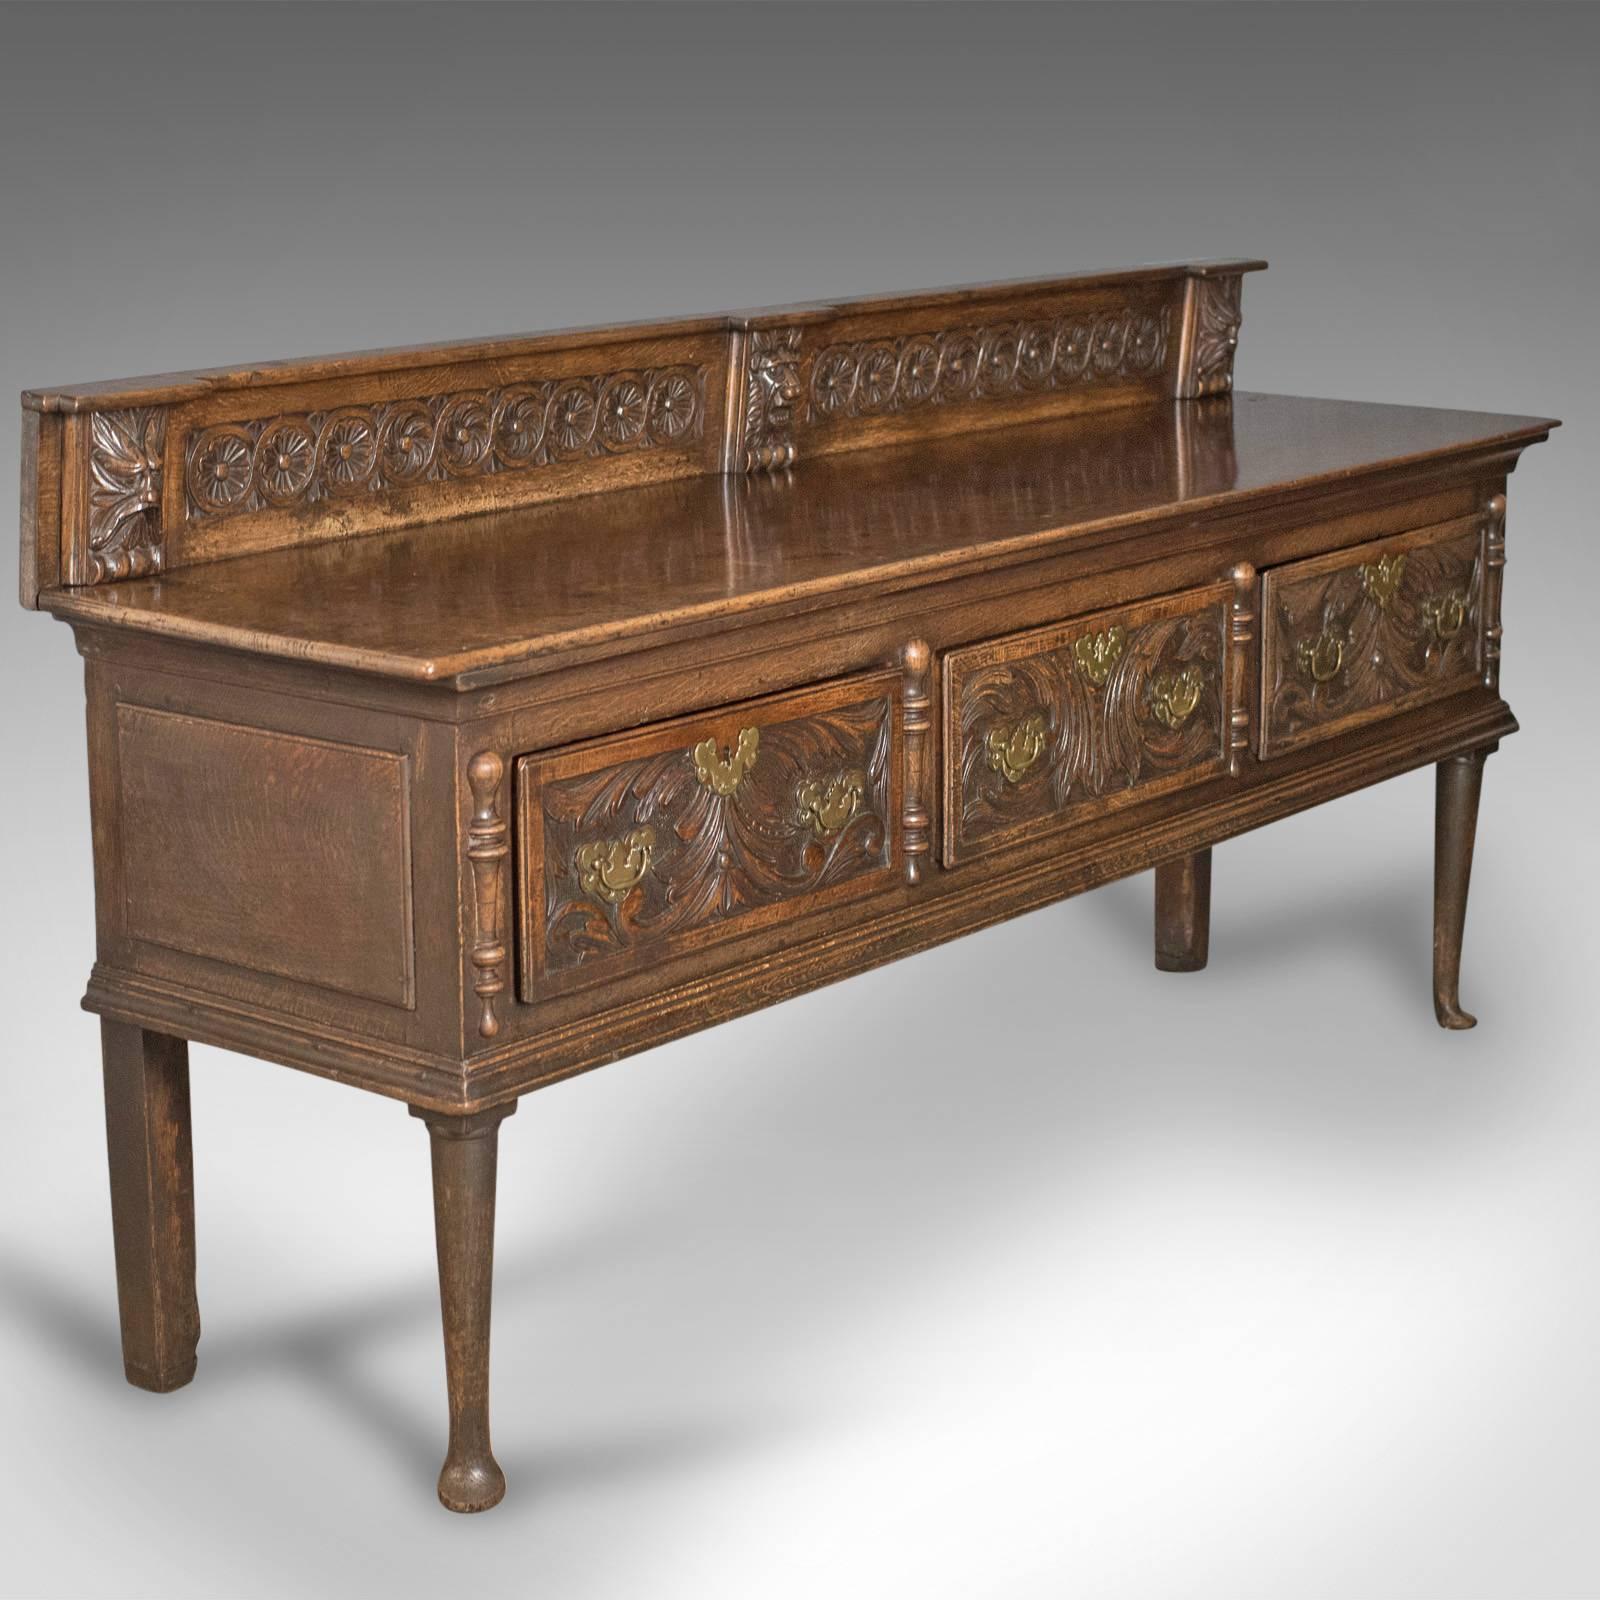 This is a Georgian oak dresser base from the 18th century. An English 'green man' sideboard dating to circa 1790.

Solidly constructed in oak with desirable color and patina
Displaying wisps of medullary rays in the lustrous wax polished